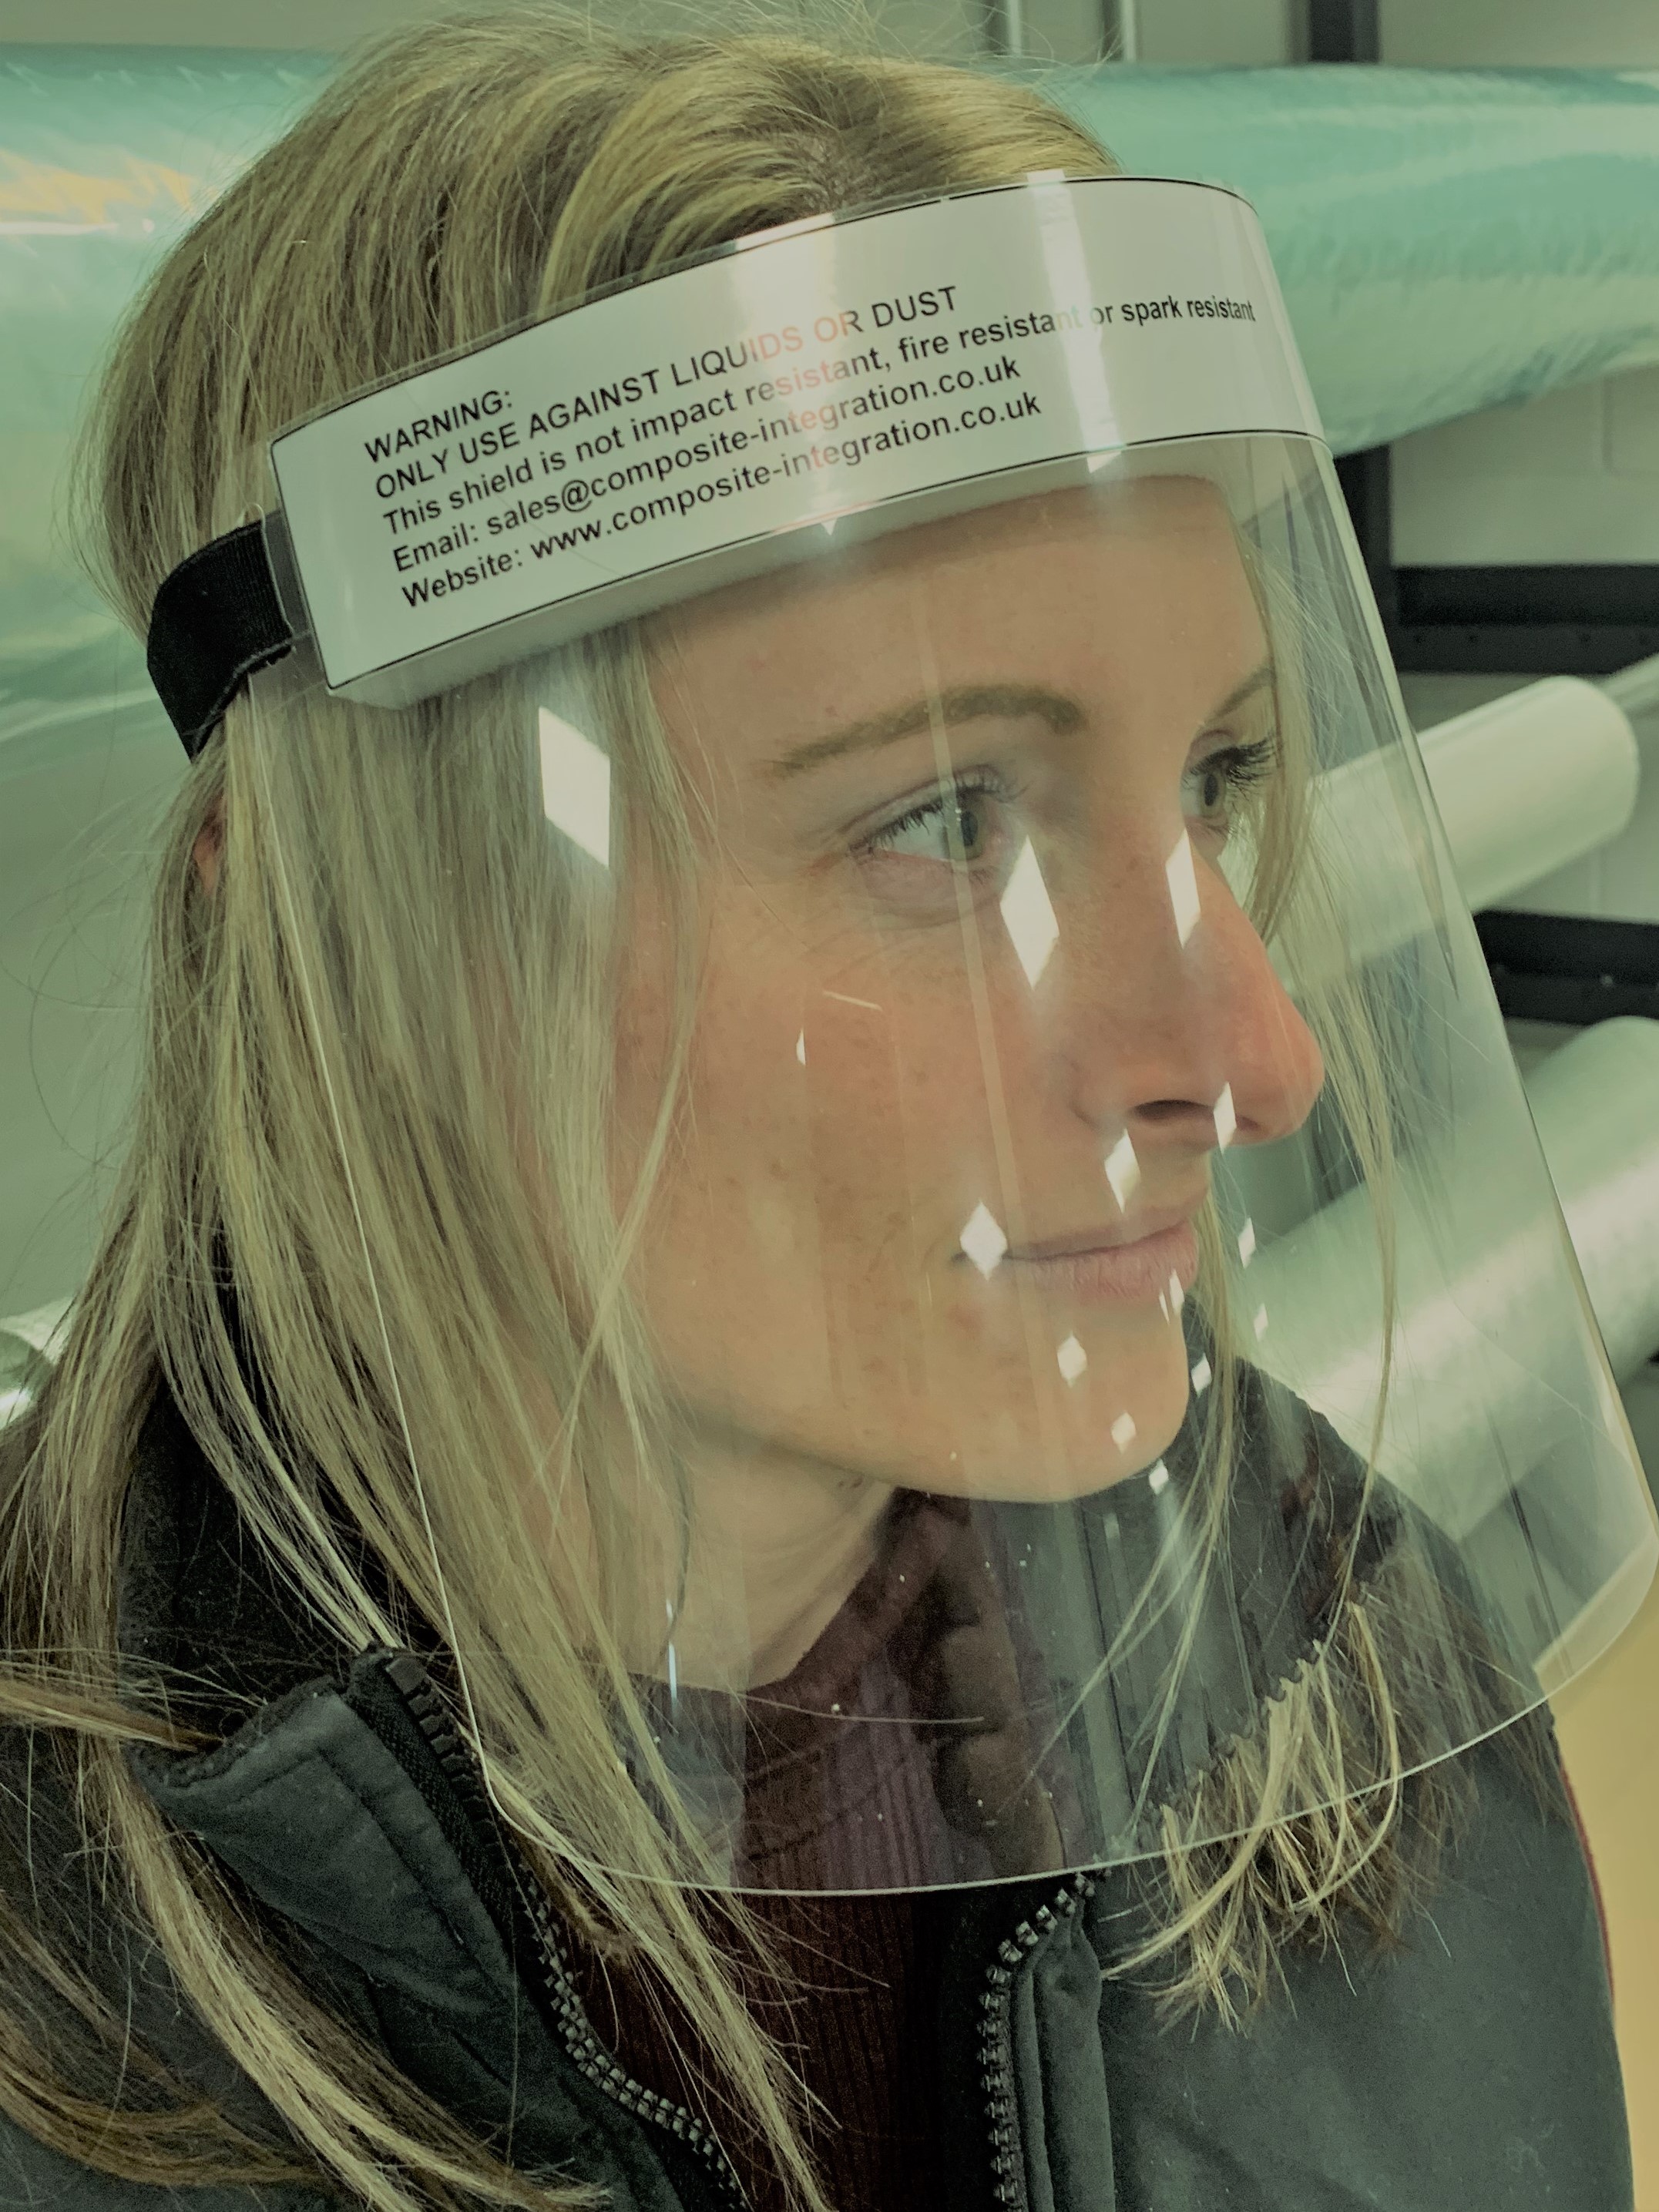 Composite Integration, a manufacturing company based in the UK says that it is working with other companies to accelerate the design of face visors.